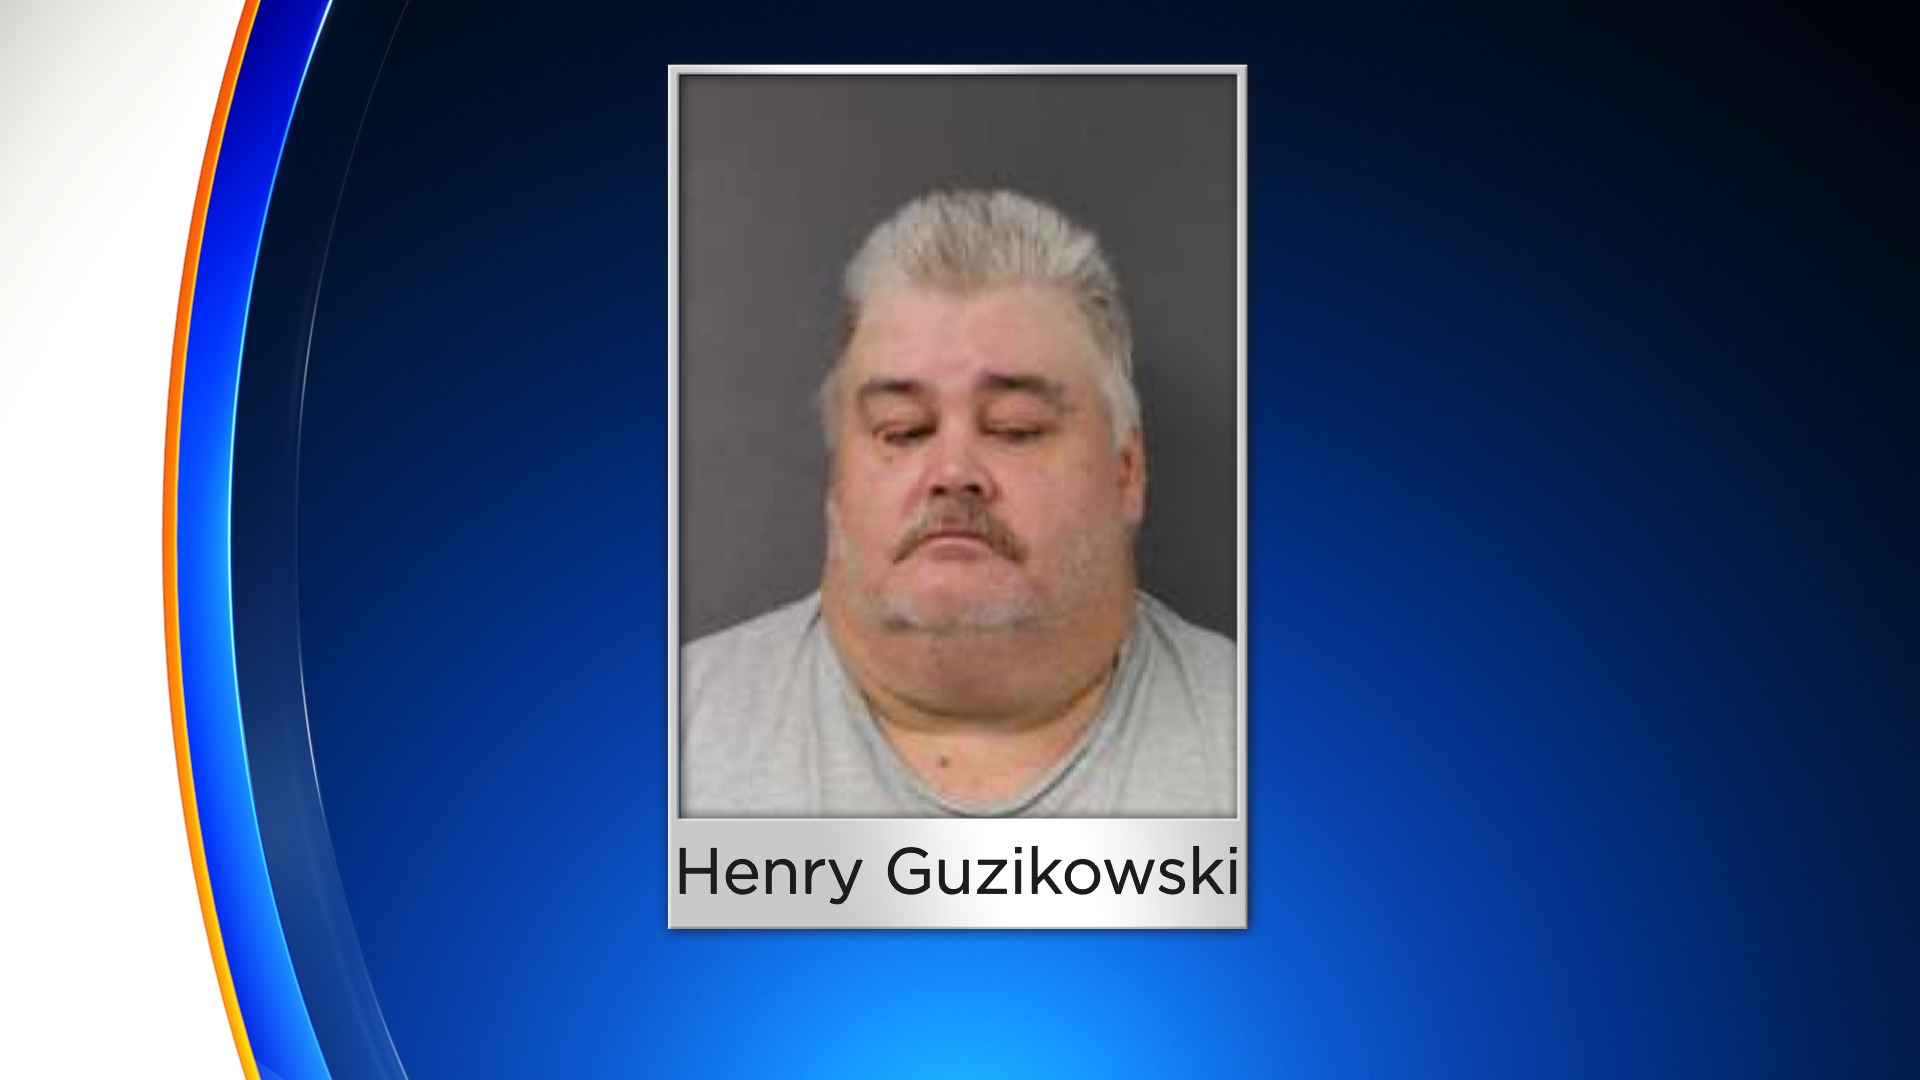 Henry Guzikowski - Hamilton Township Farm Owner Pleads Guilty After Several Animals Found Covered In 6 Inches Of Feces